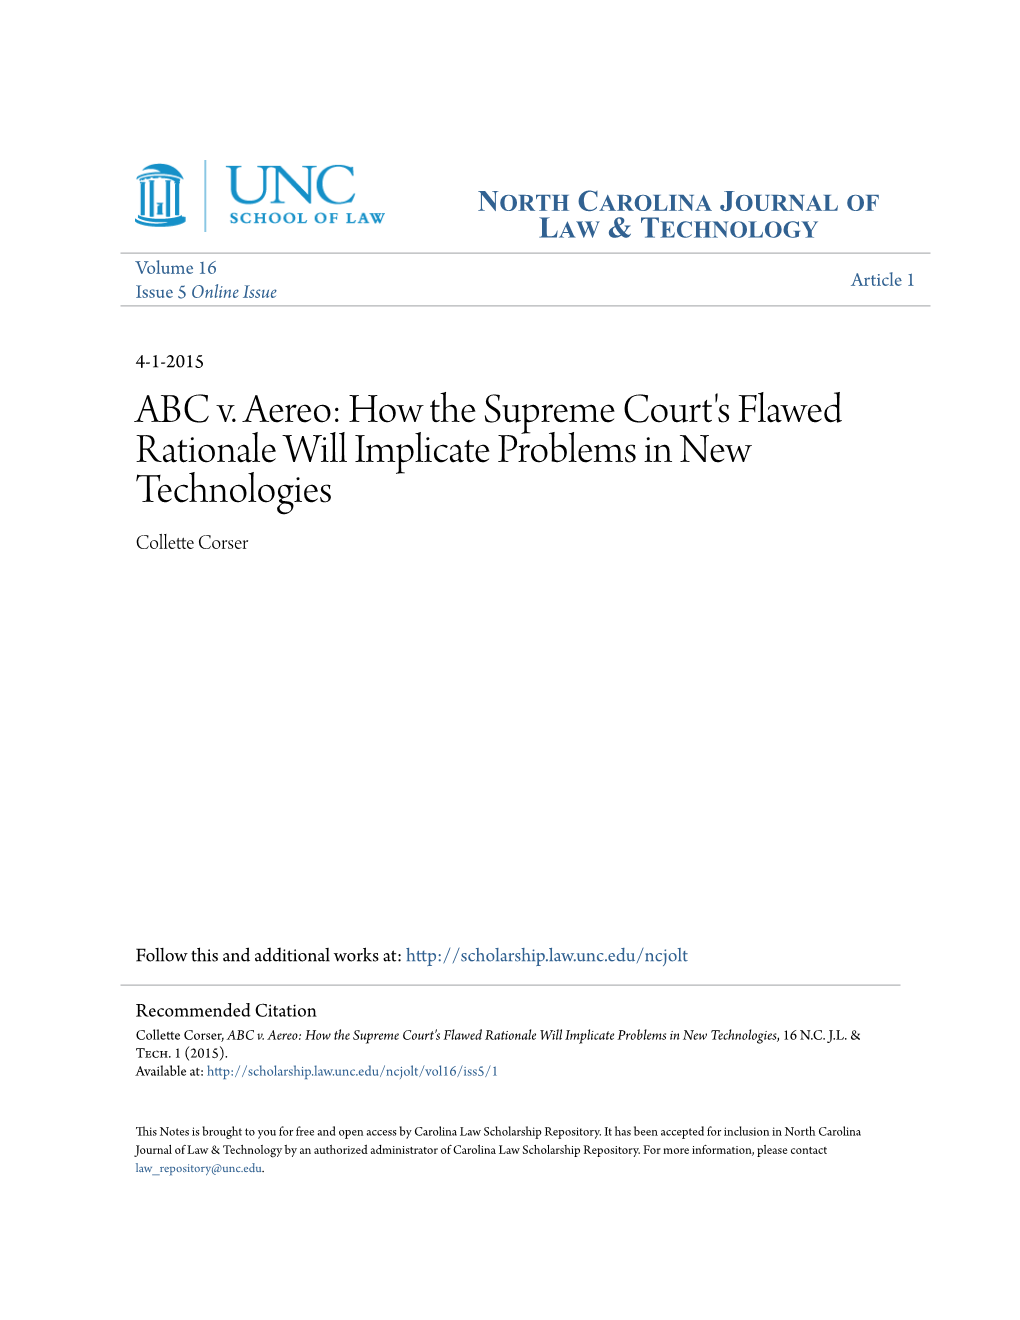 ABC V. Aereo: How the Supreme Court's Flawed Rationale Will Implicate Problems in New Technologies Collette Corser